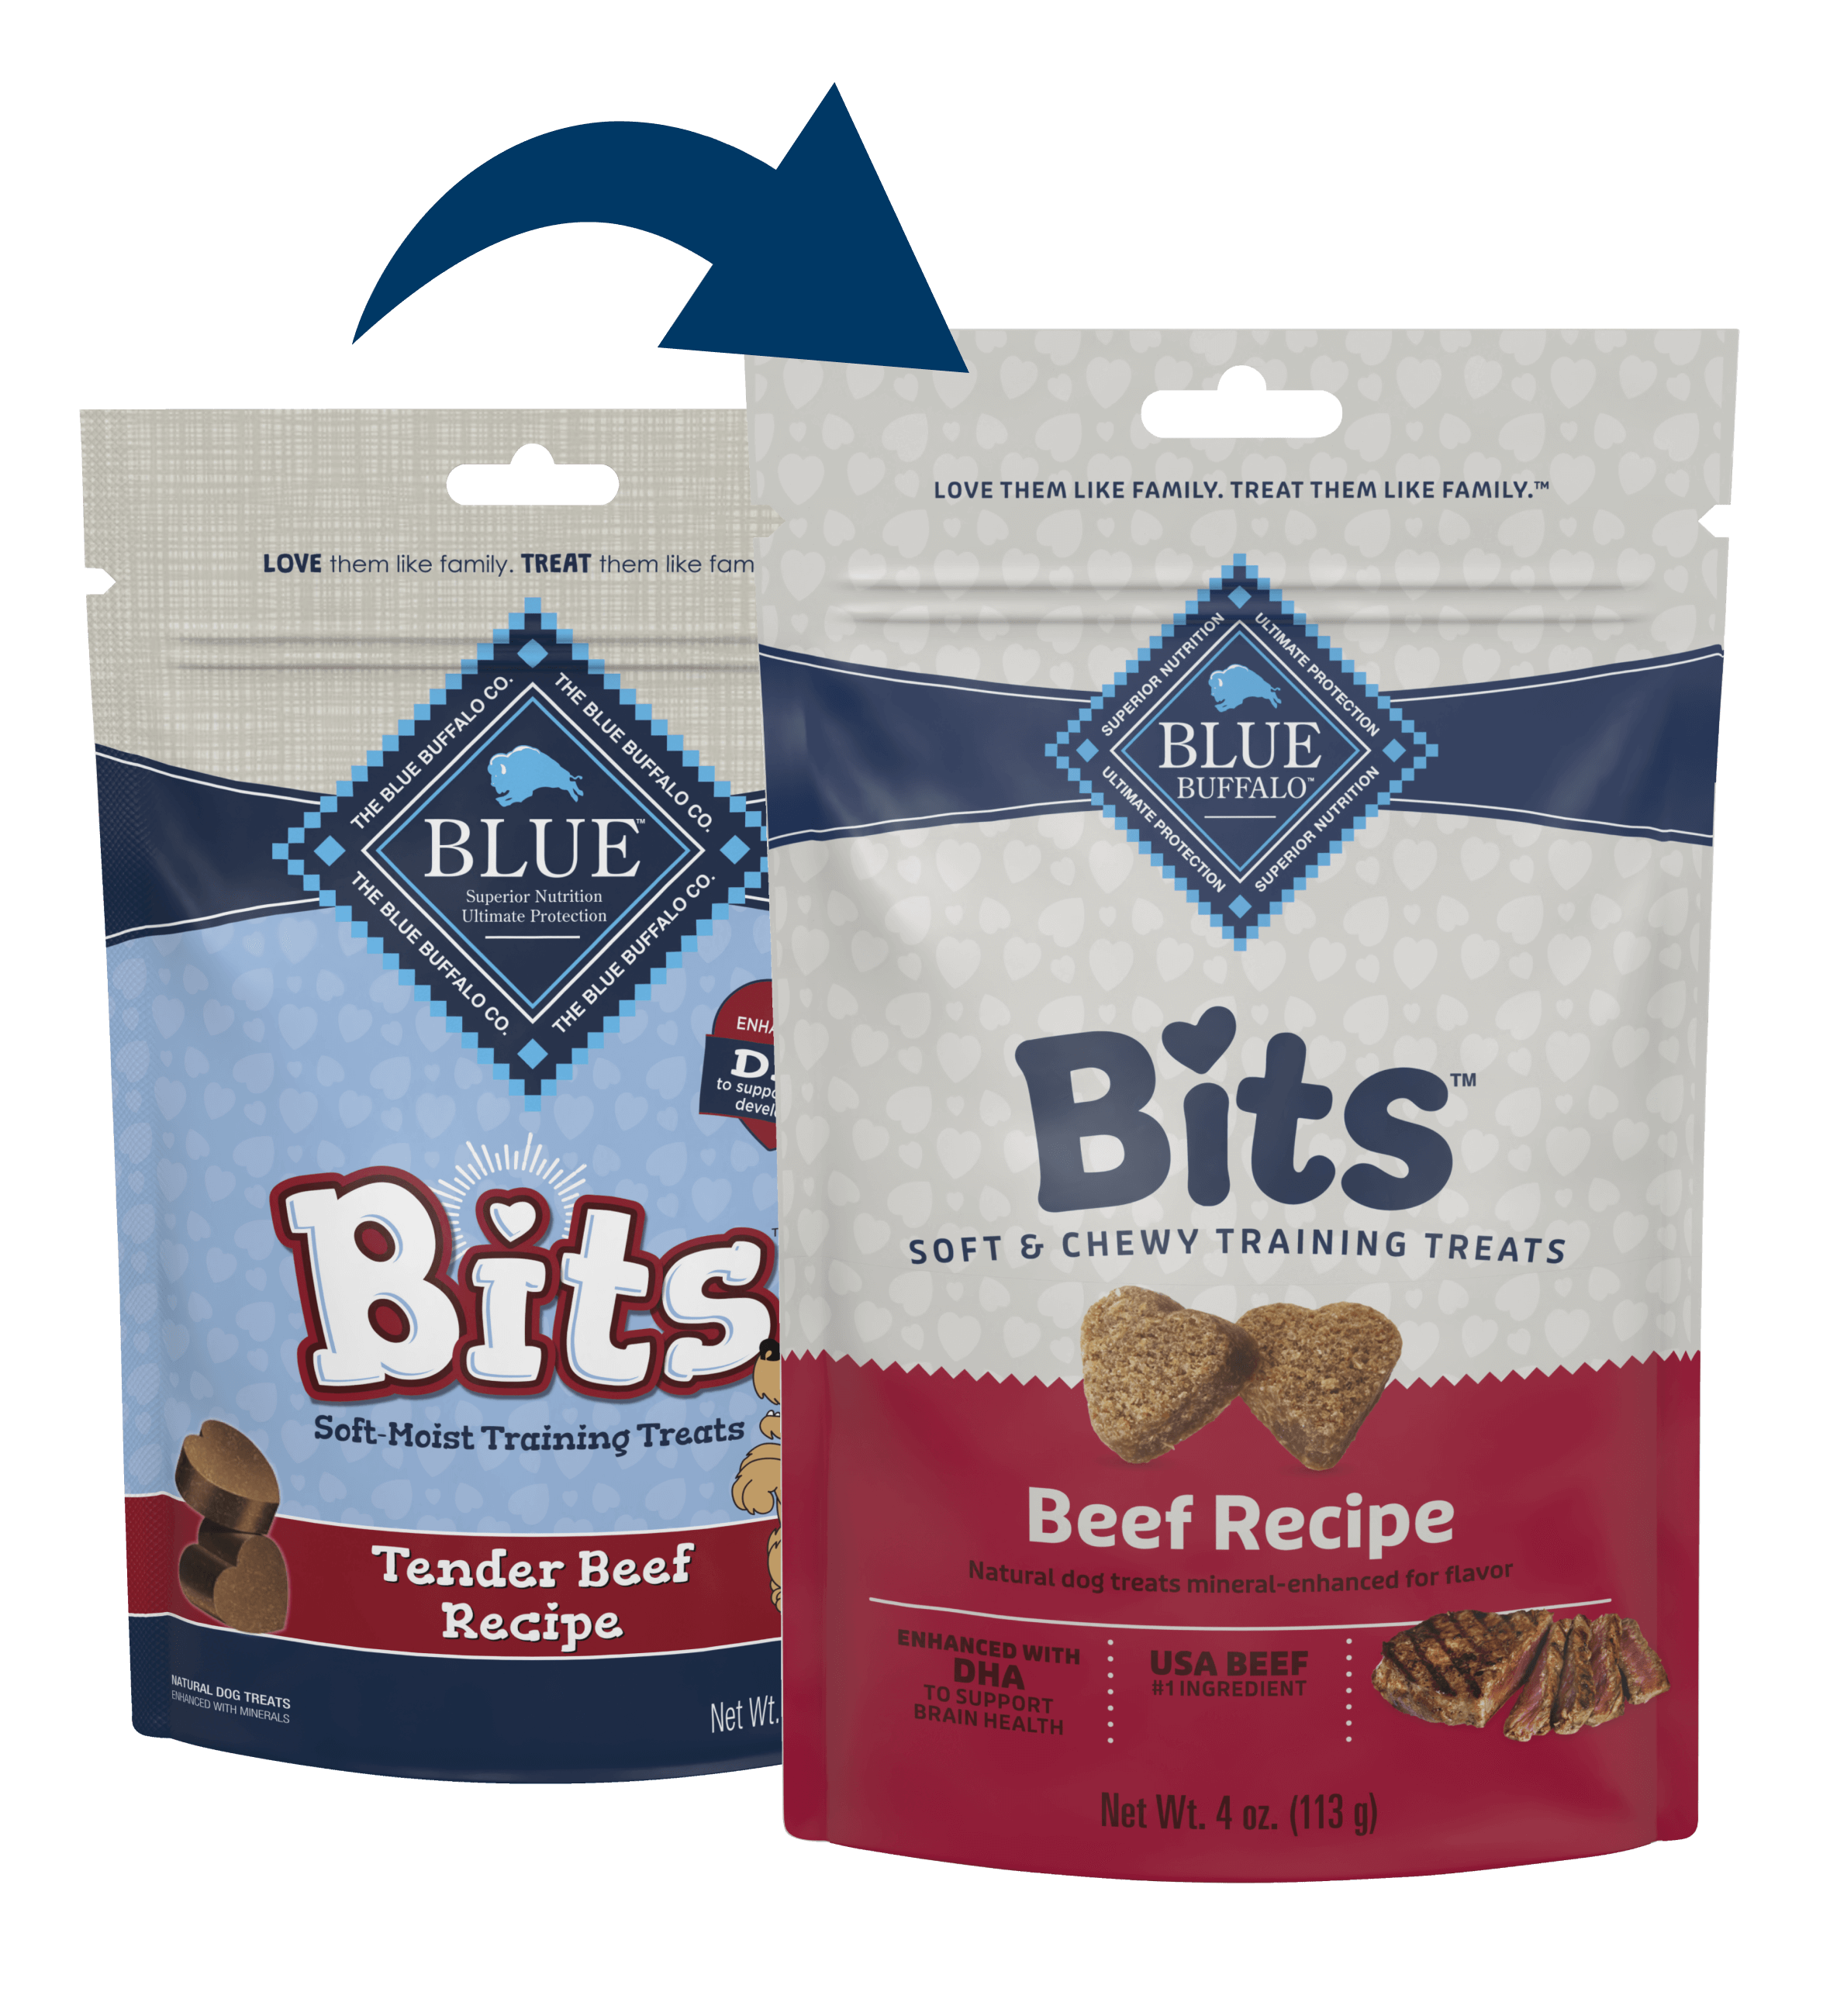 Blue Buffalo Bits Tender Beef Soft and Chewy Training Treats dog treats soft in new packshot bags, highlighting the packaging transition.